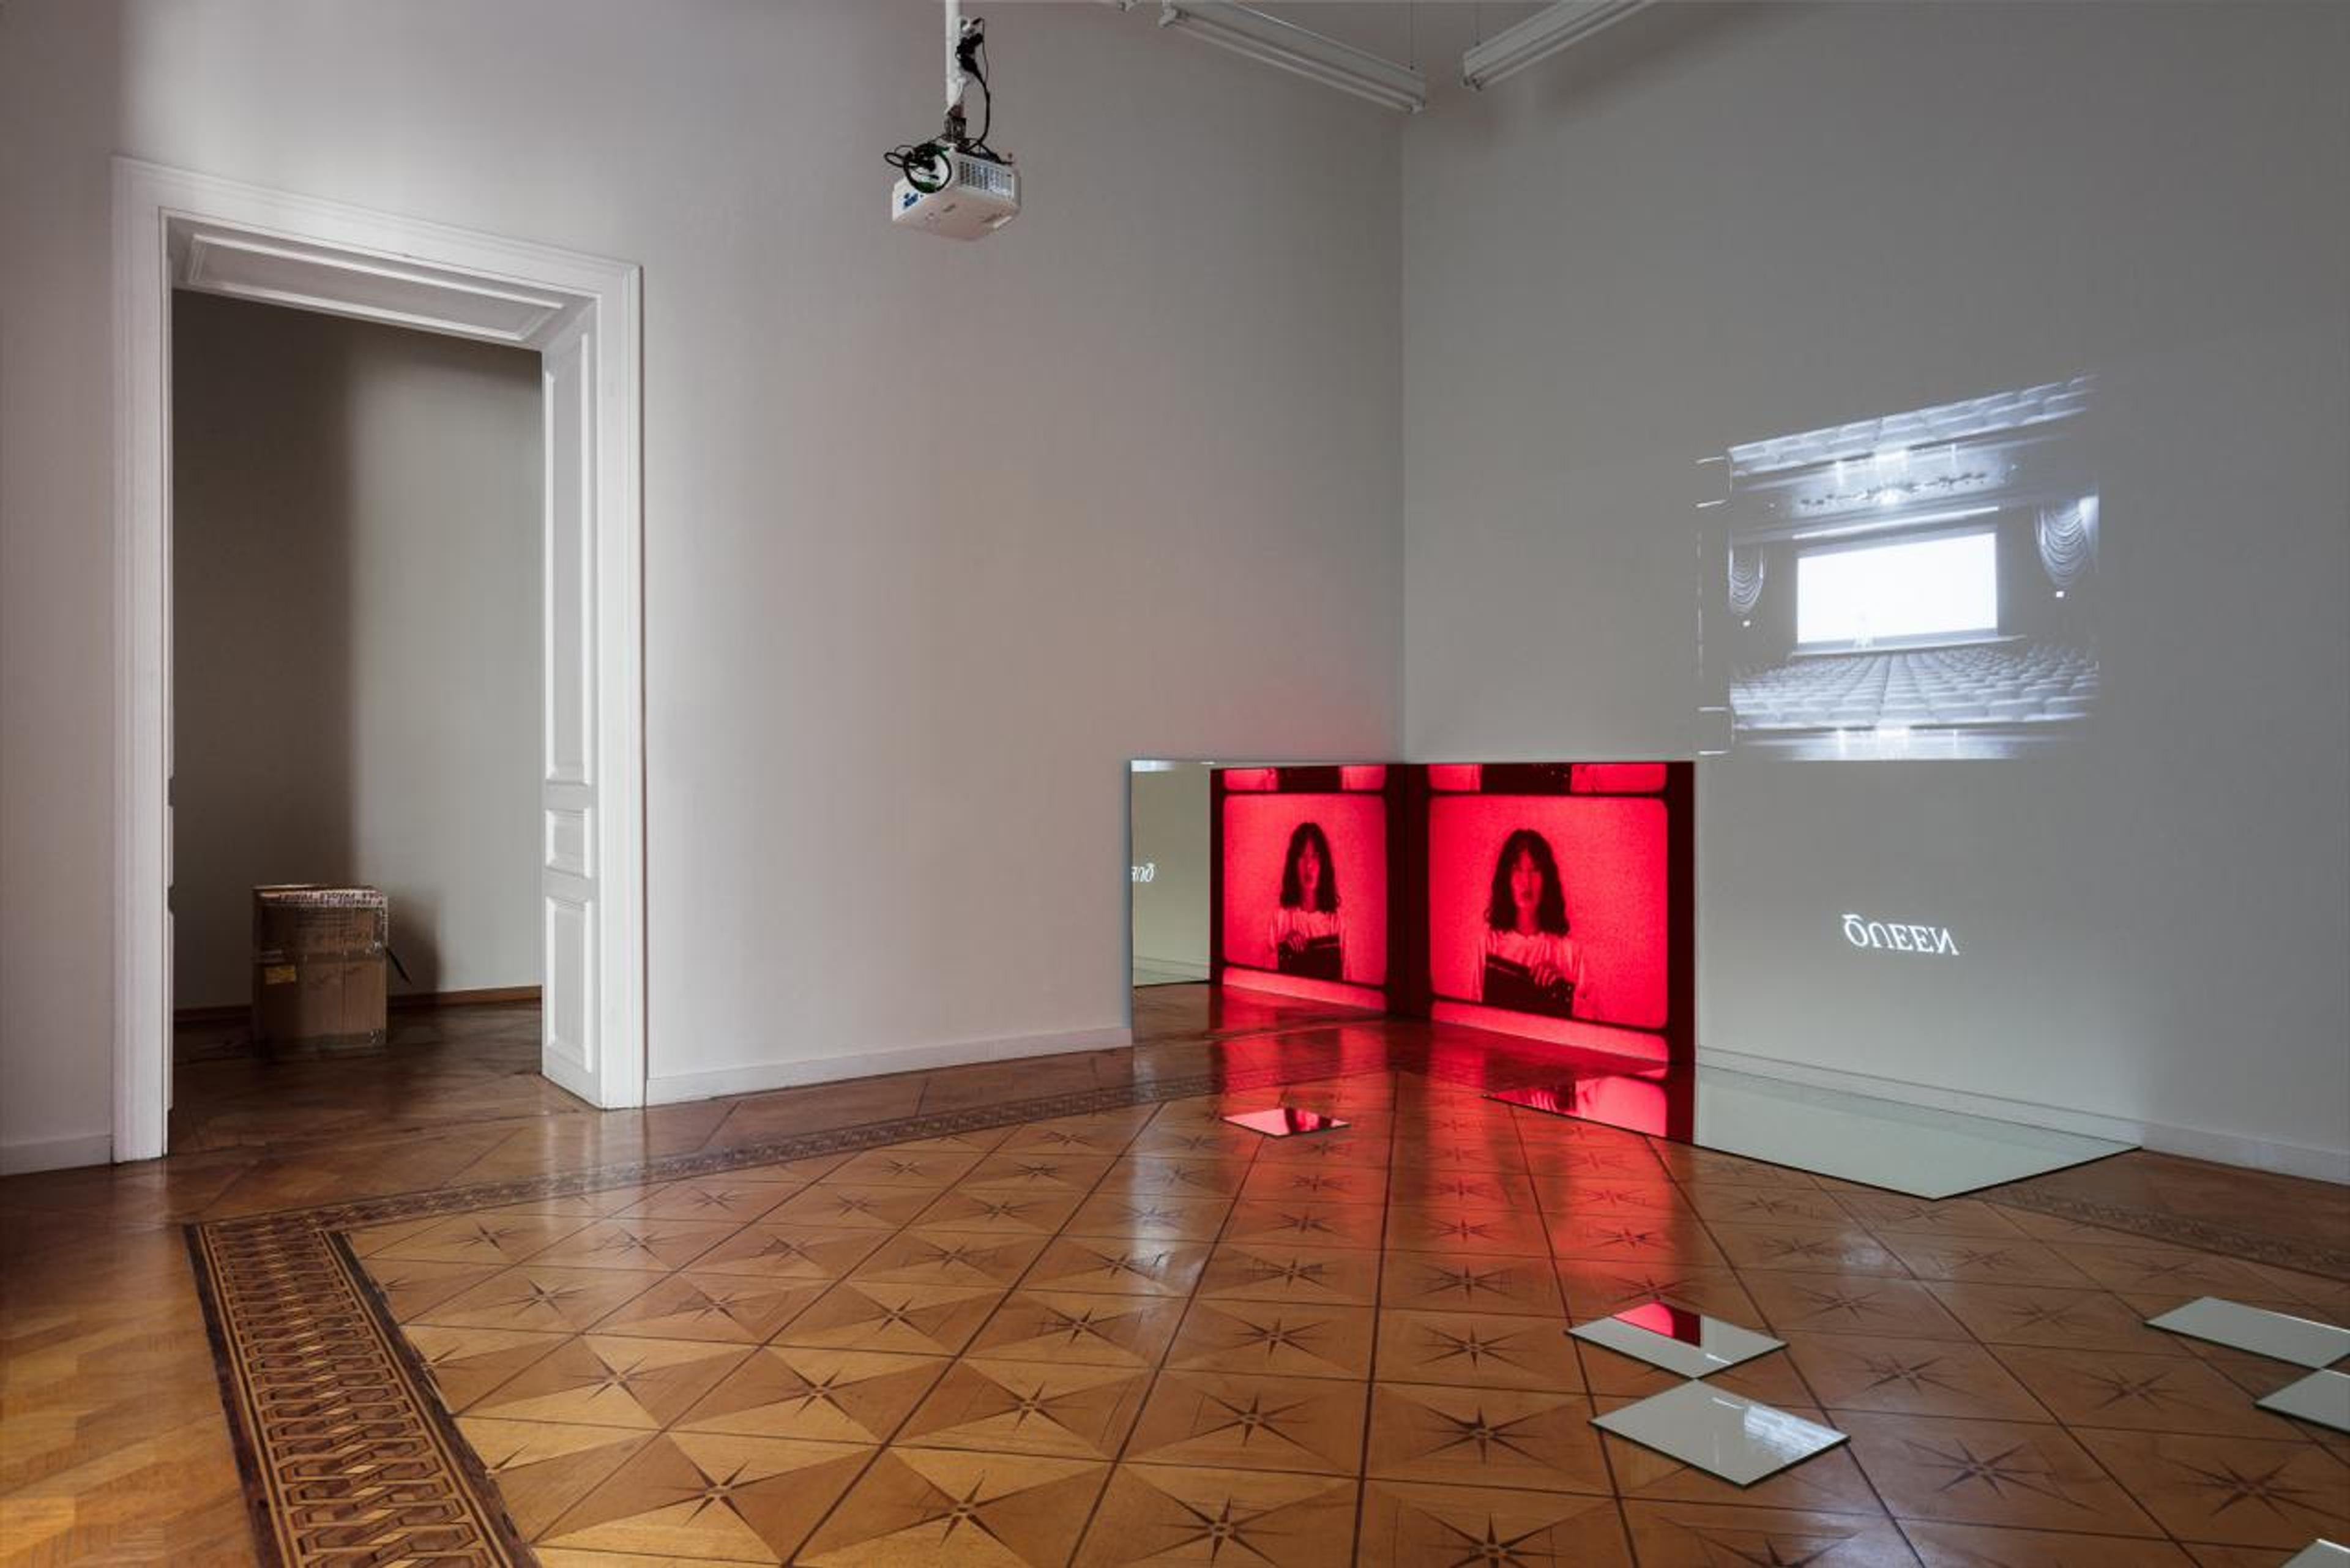   View of Na Mira and Patricia L. Boyd, “Perpetual Language,” curated by Quinn Latimer, Croy Nielsen, Vienna, 2023